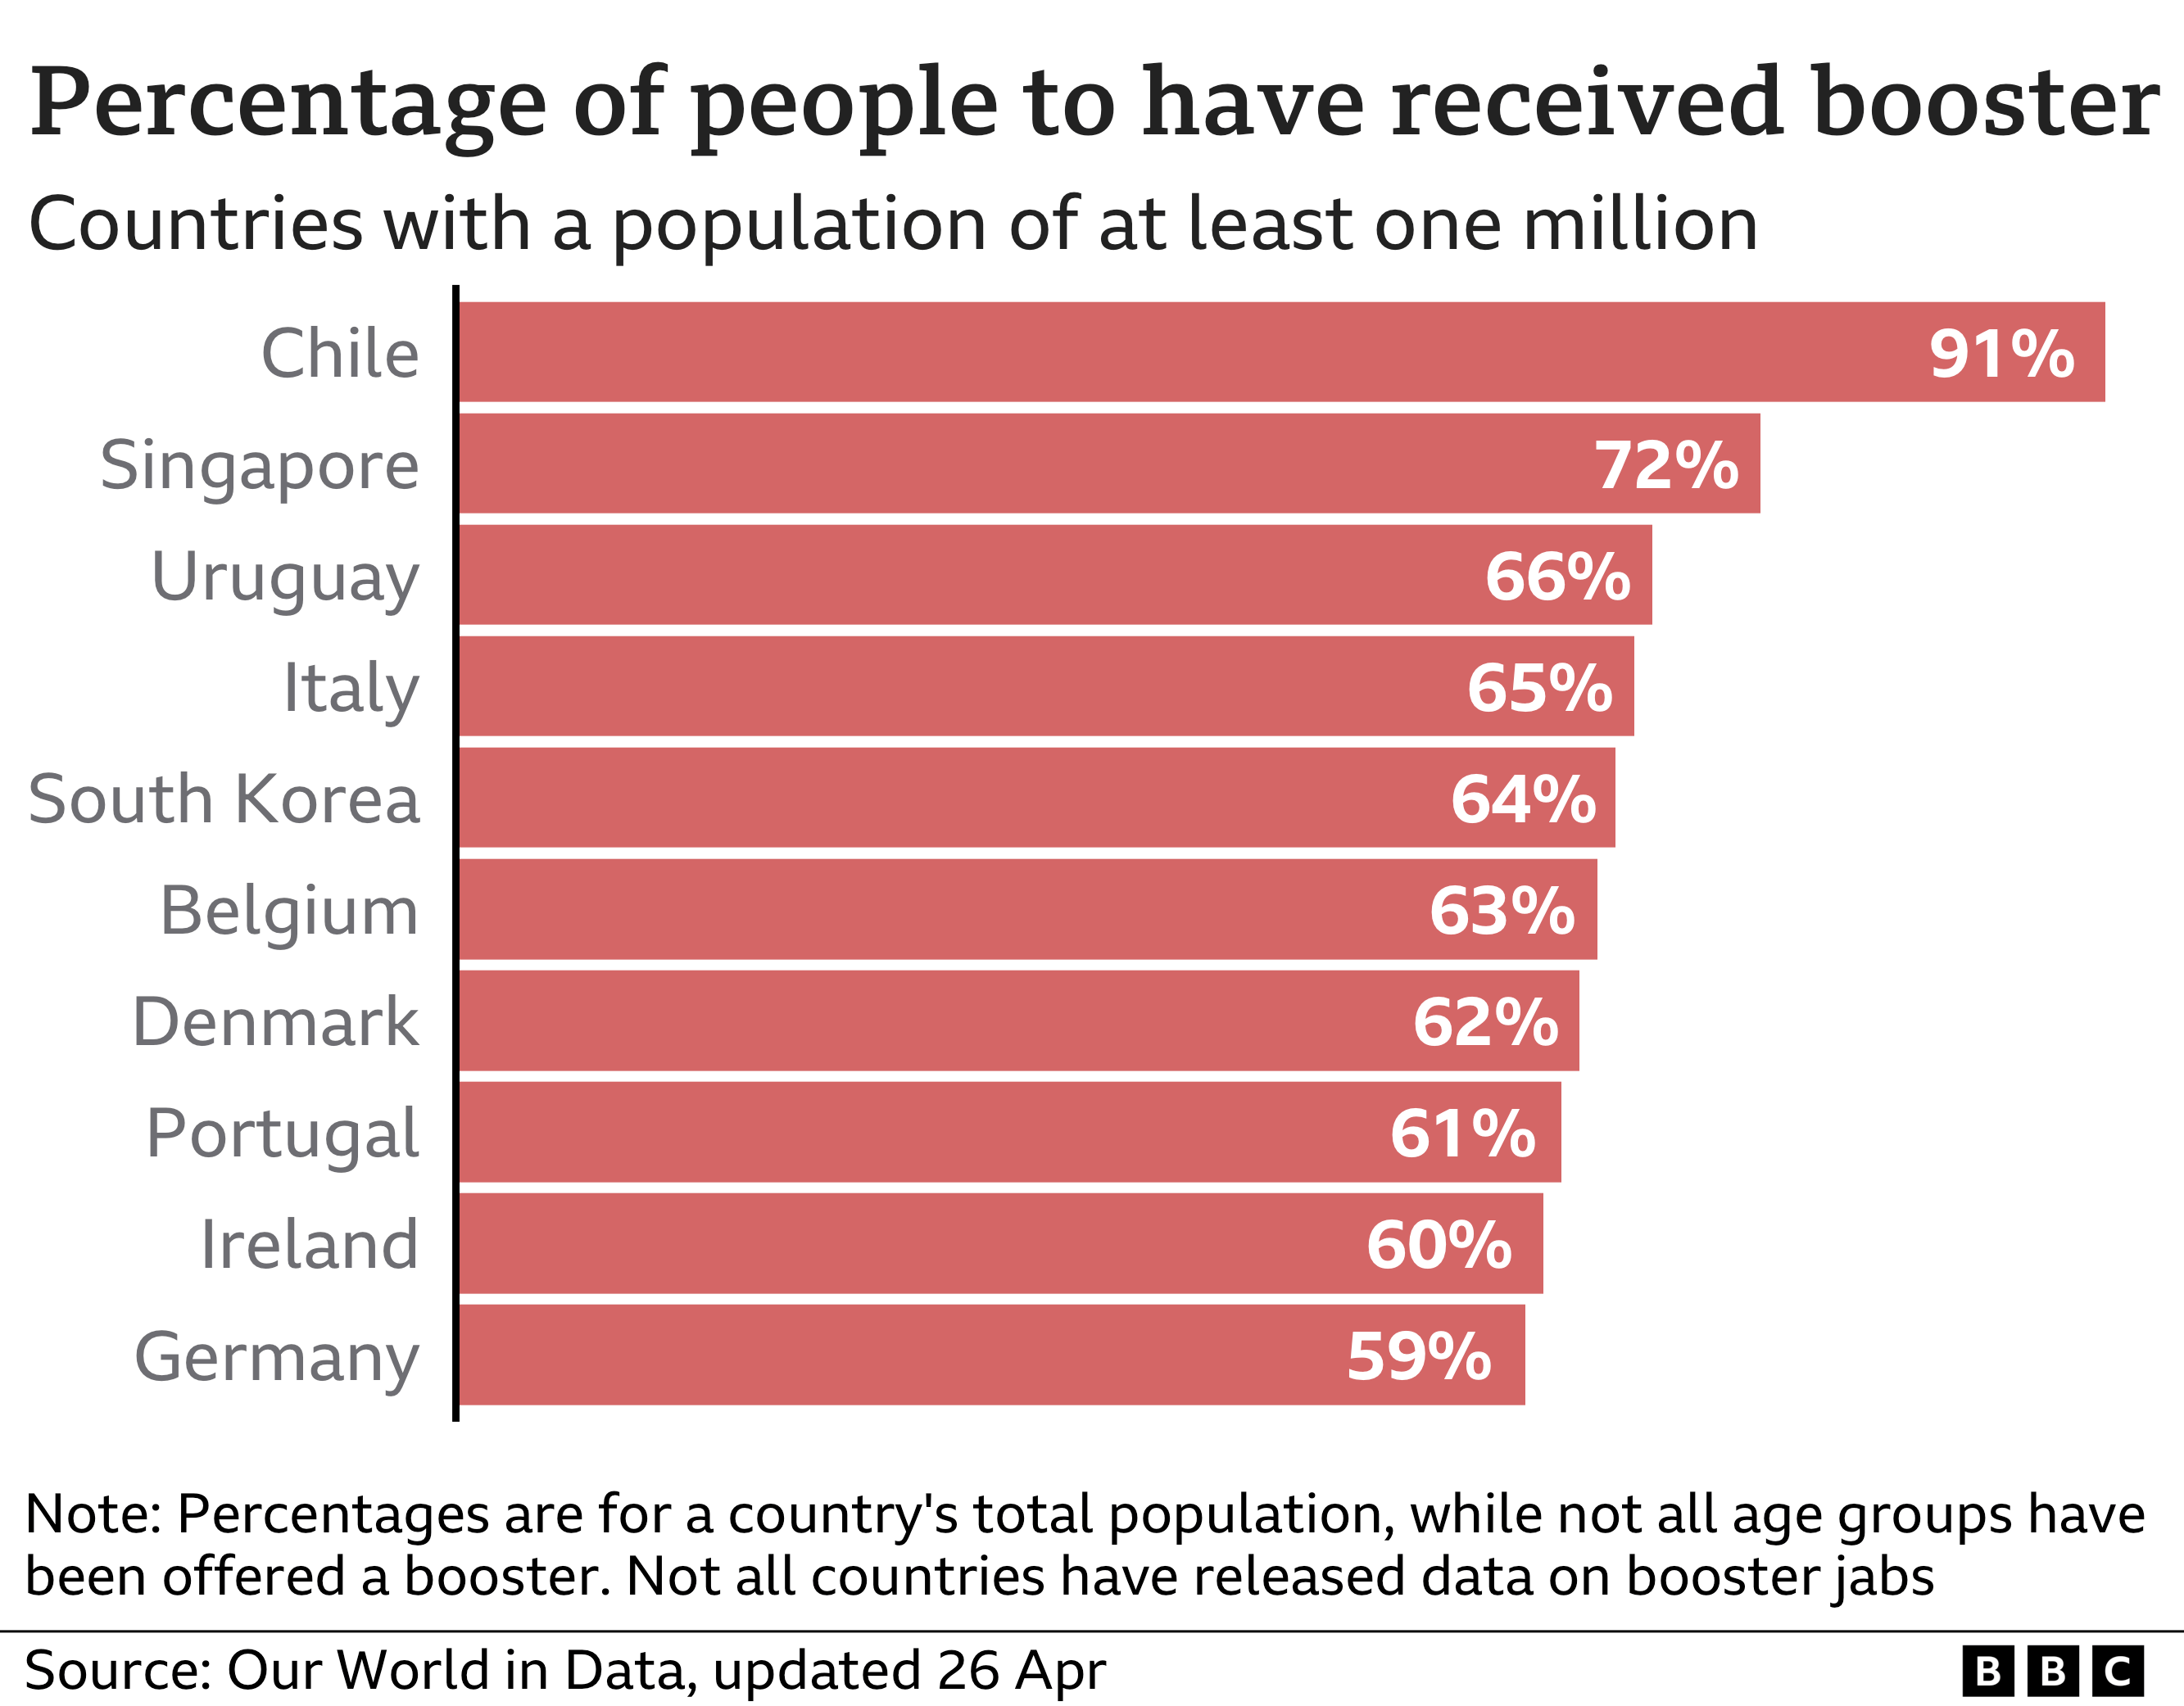 Chart showing percentage of people who have received a booster dose where the population is over one million. Chile is first with 91%, Singapore follows with 72%. Italy, South Korea, Belgium, Denmark, Uruguay and Portugal all above 60%.